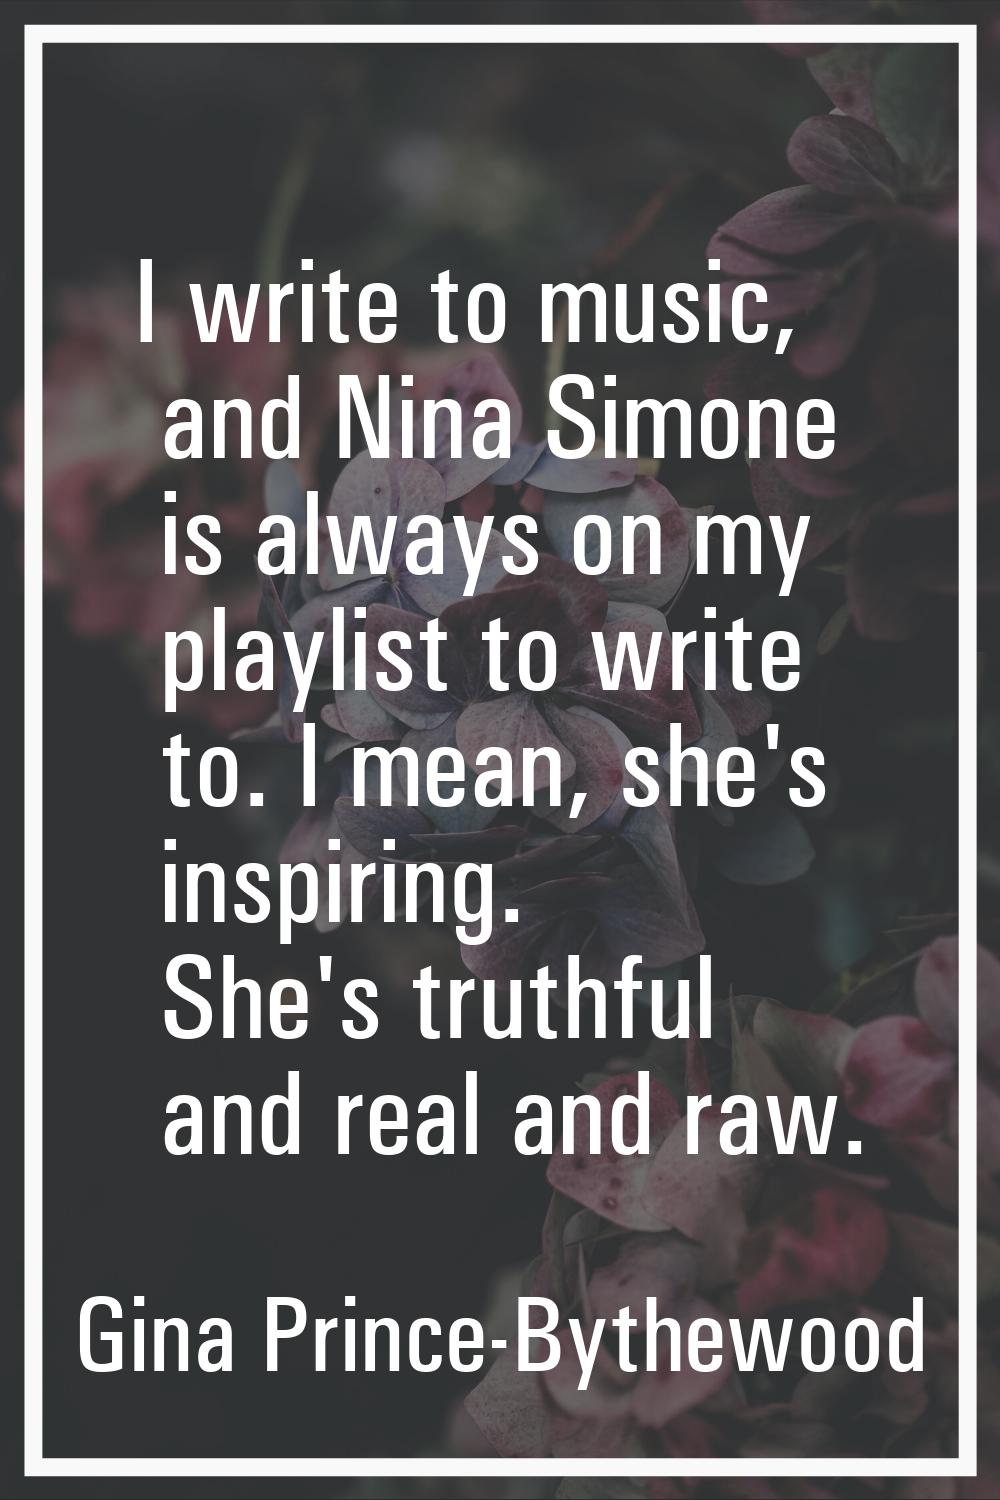 I write to music, and Nina Simone is always on my playlist to write to. I mean, she's inspiring. Sh